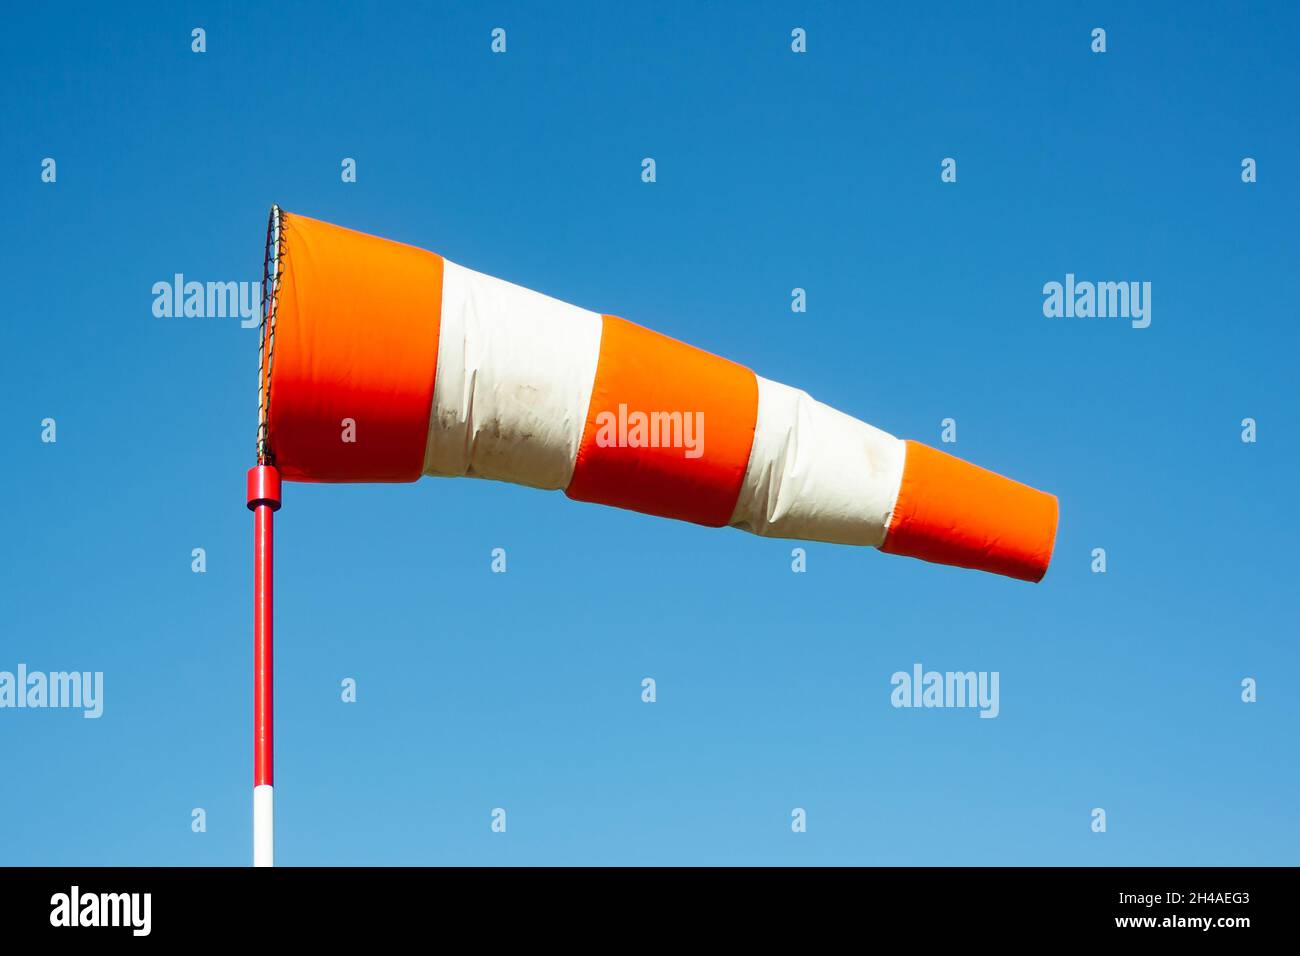 Airport wind sock. Strong wind and bad weather symbol. Climate change. Meteorology forecast. Storm is coming. Stock Photo